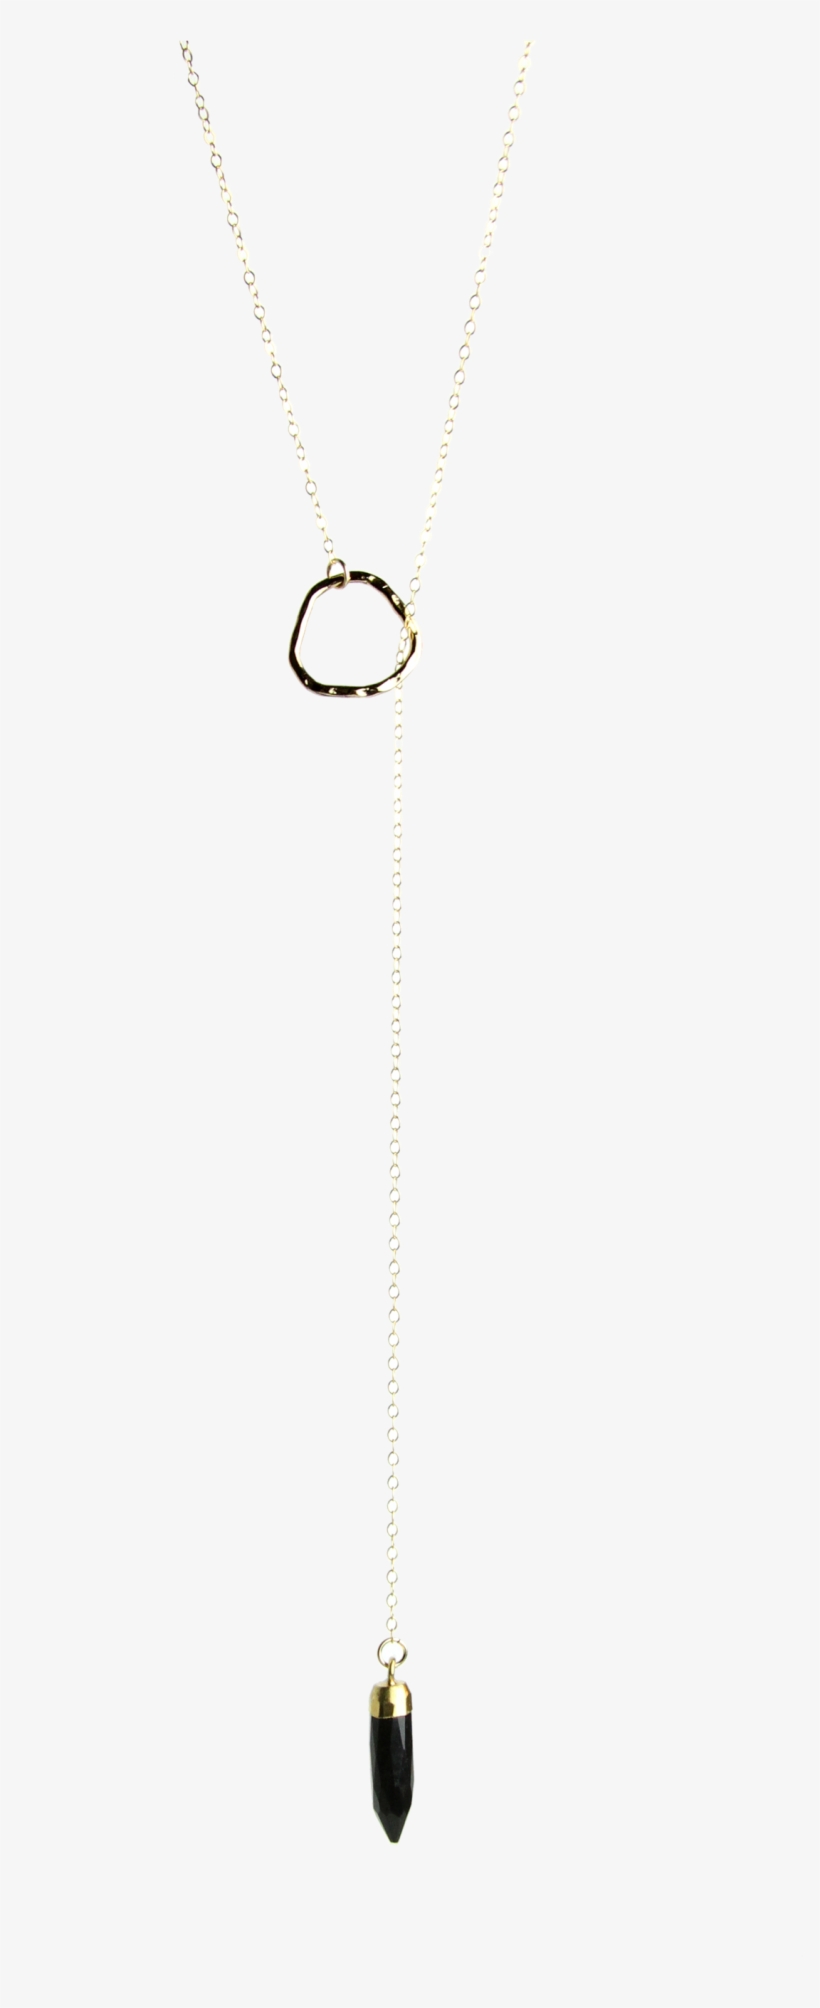 Gemstone Point Lariat Necklace In Onyx - Locket, transparent png #7734883